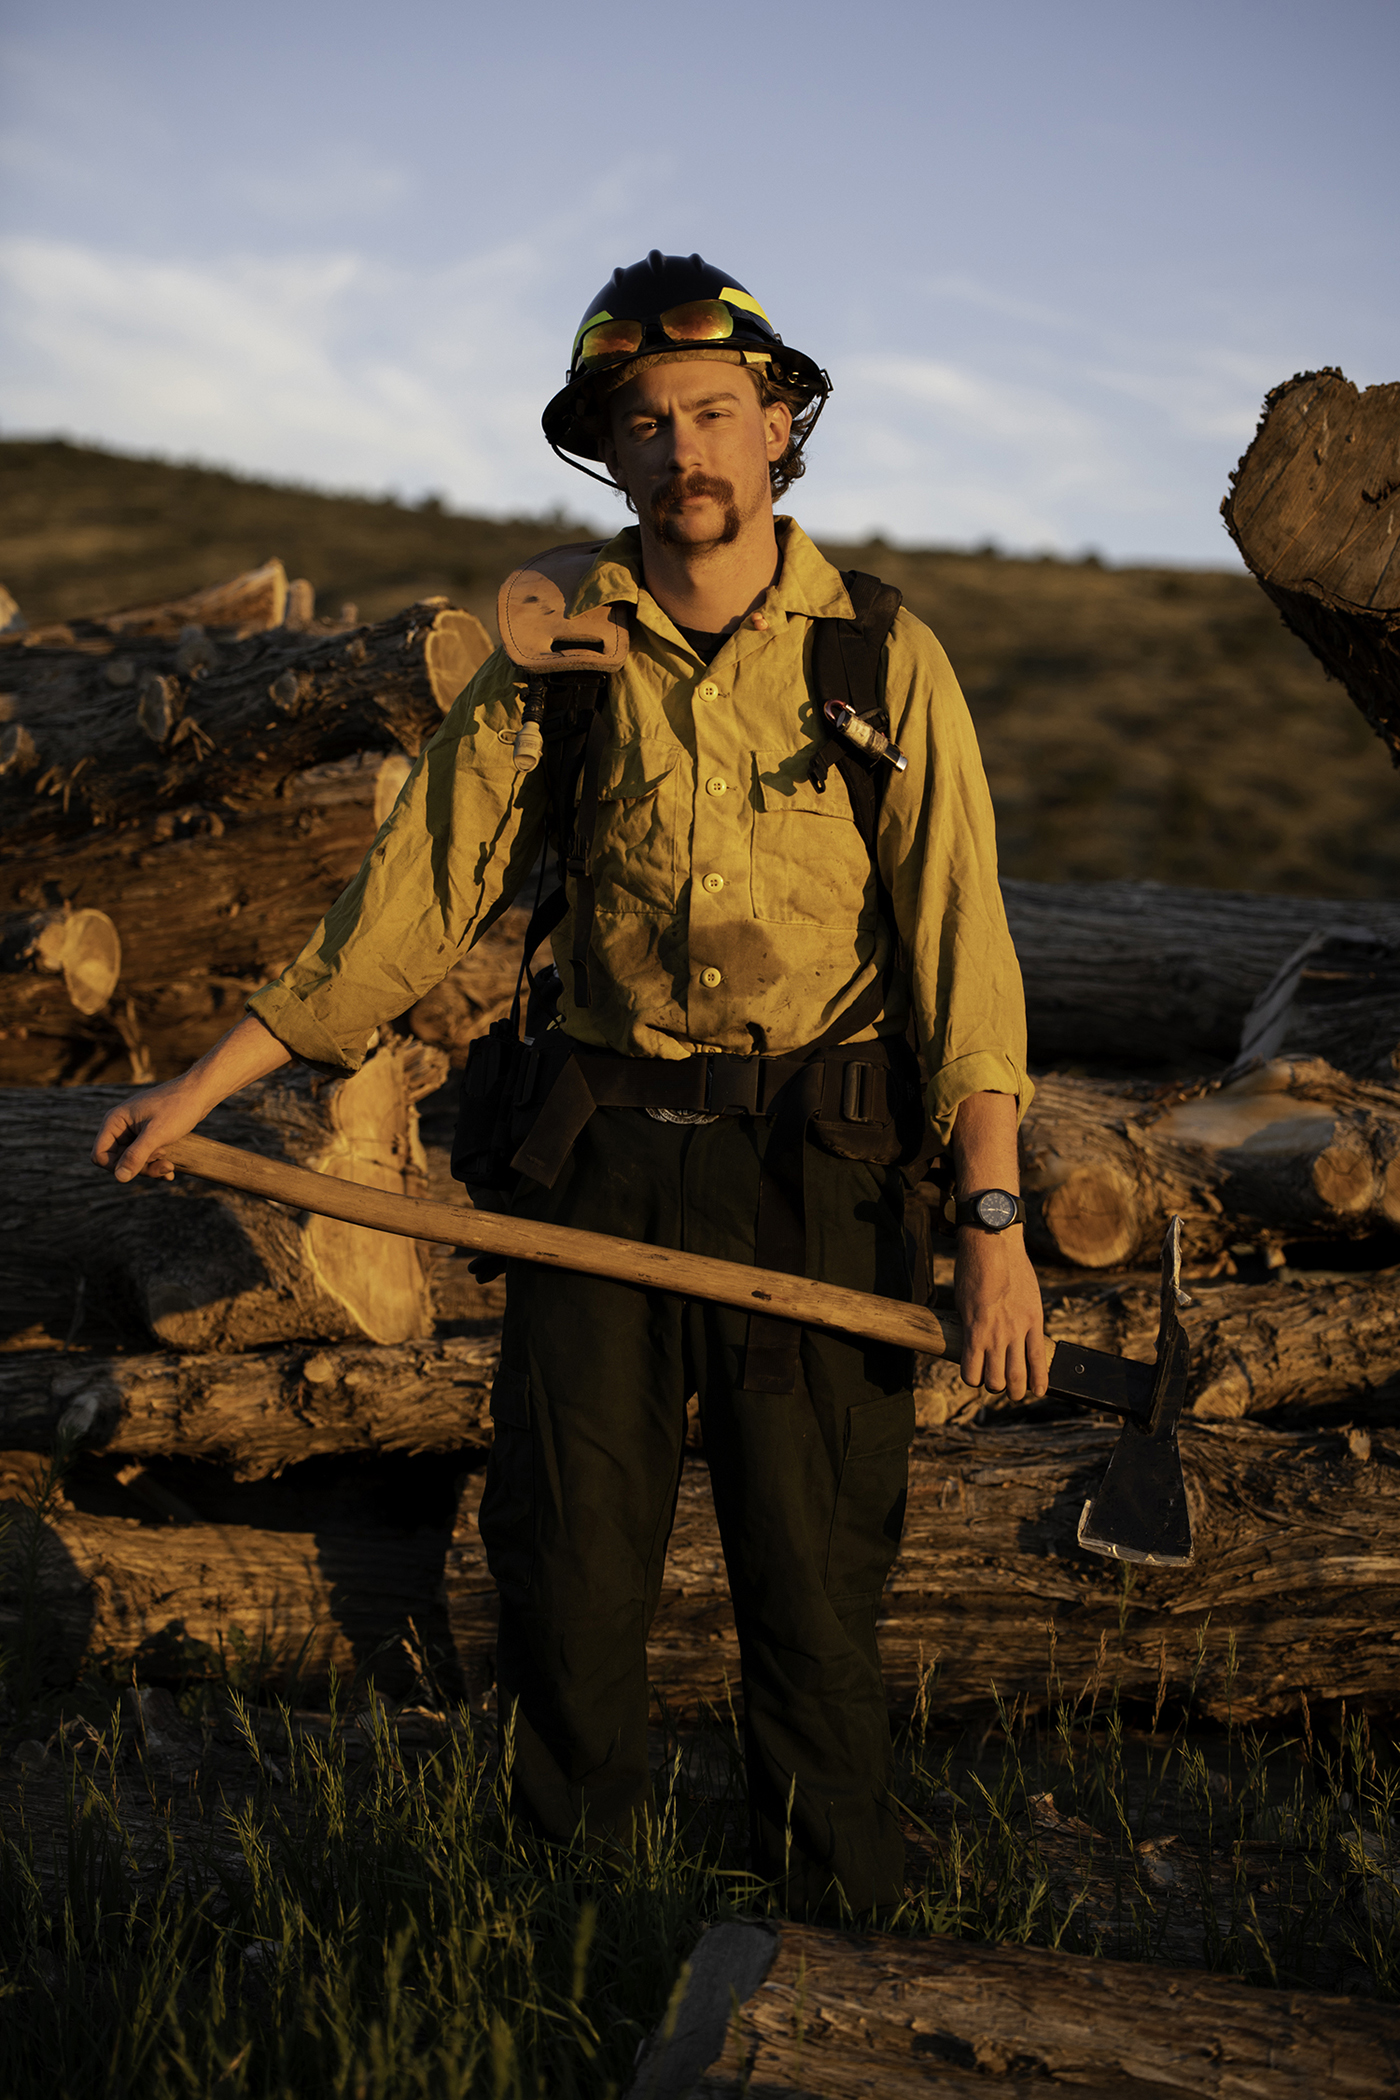 A portrait of a man in the wild, surrounded by chopped-down lumber.